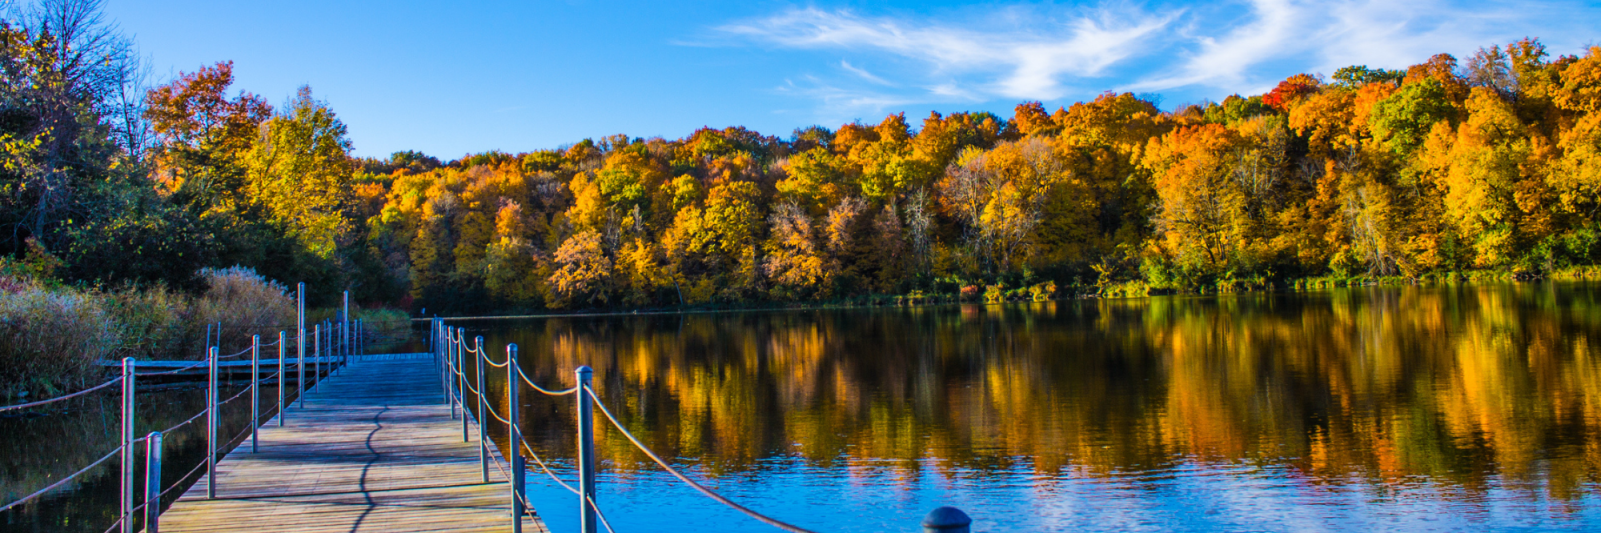 Dock leading over a MN lake with trees in classic fall colors behind